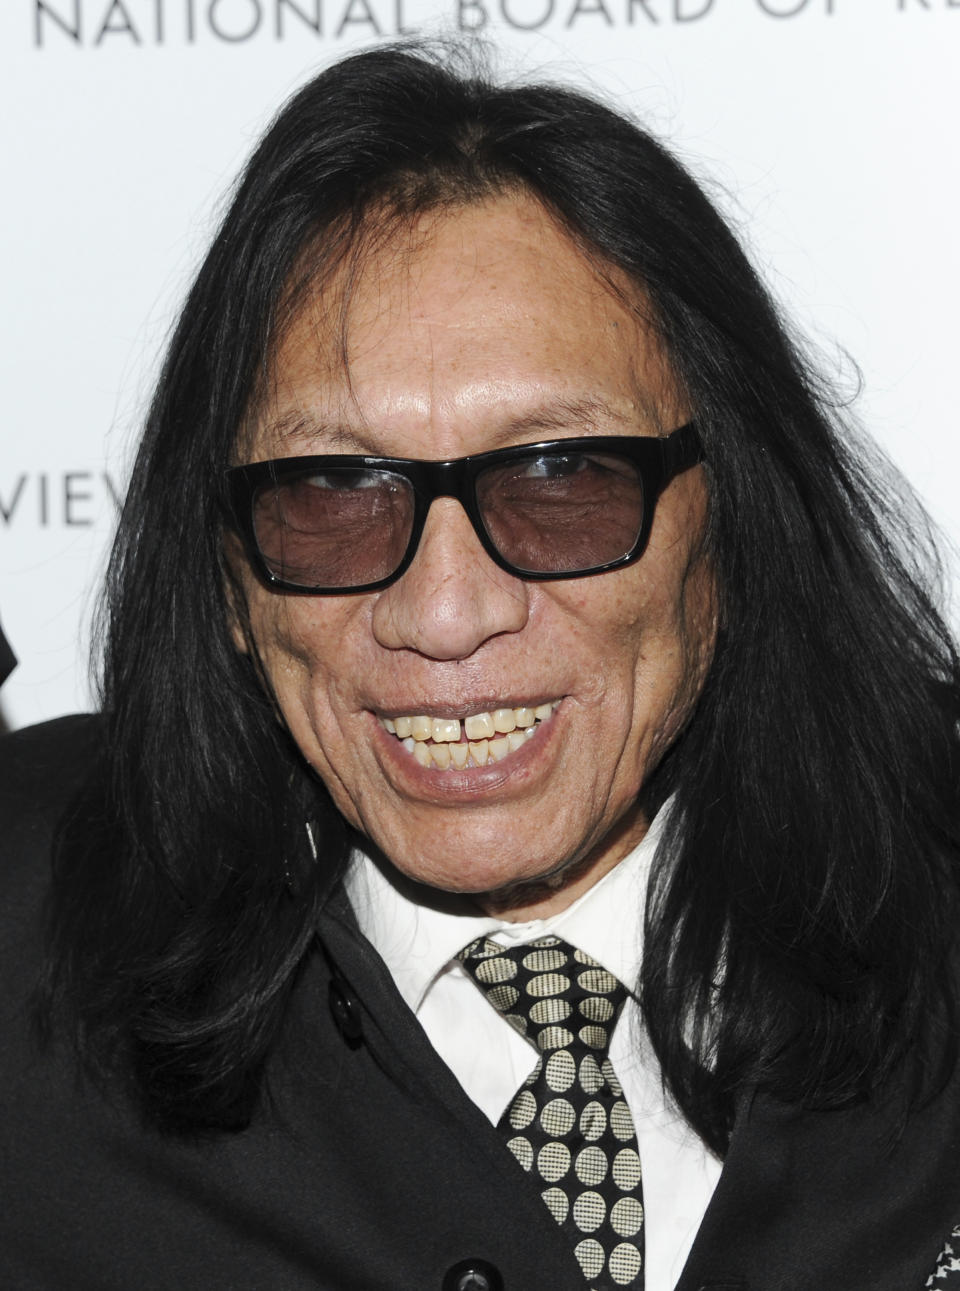 FILE - Musician Sixto Rodriguez attends the National Board of Review Awards gala at Cipriani 42nd St. on Jan. 8, 2013, in New York. Singer and songwriter Rodriguez, who became the subject of the Oscar-winning documentary “Searching for Sugarman” has died, according to the Sugarman.org website on Tuesday, Aug. 8, 2023, and confirmed Wednesday by his granddaughter. He was 81. (Photo by Evan Agostini/Invision/AP, File)